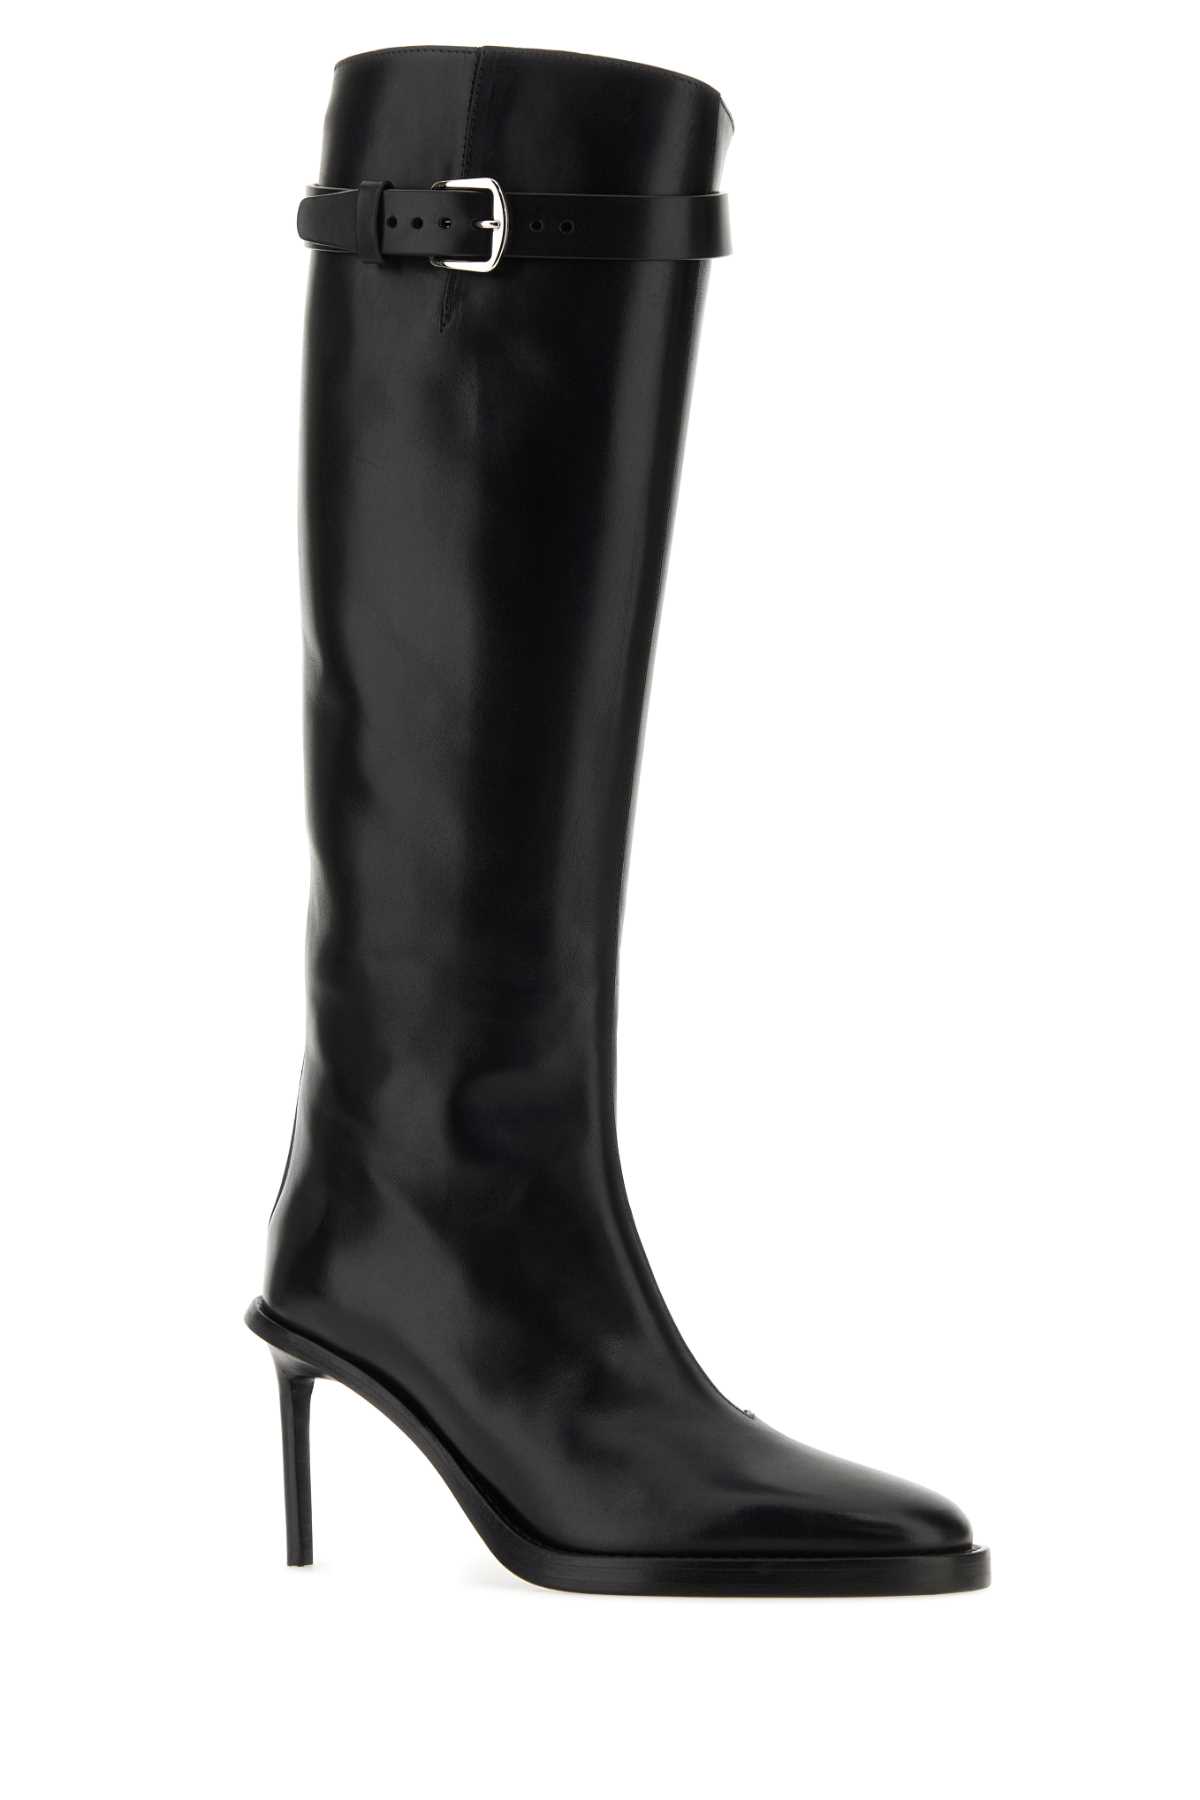 Ann Demeulemeester Black Leather Boots